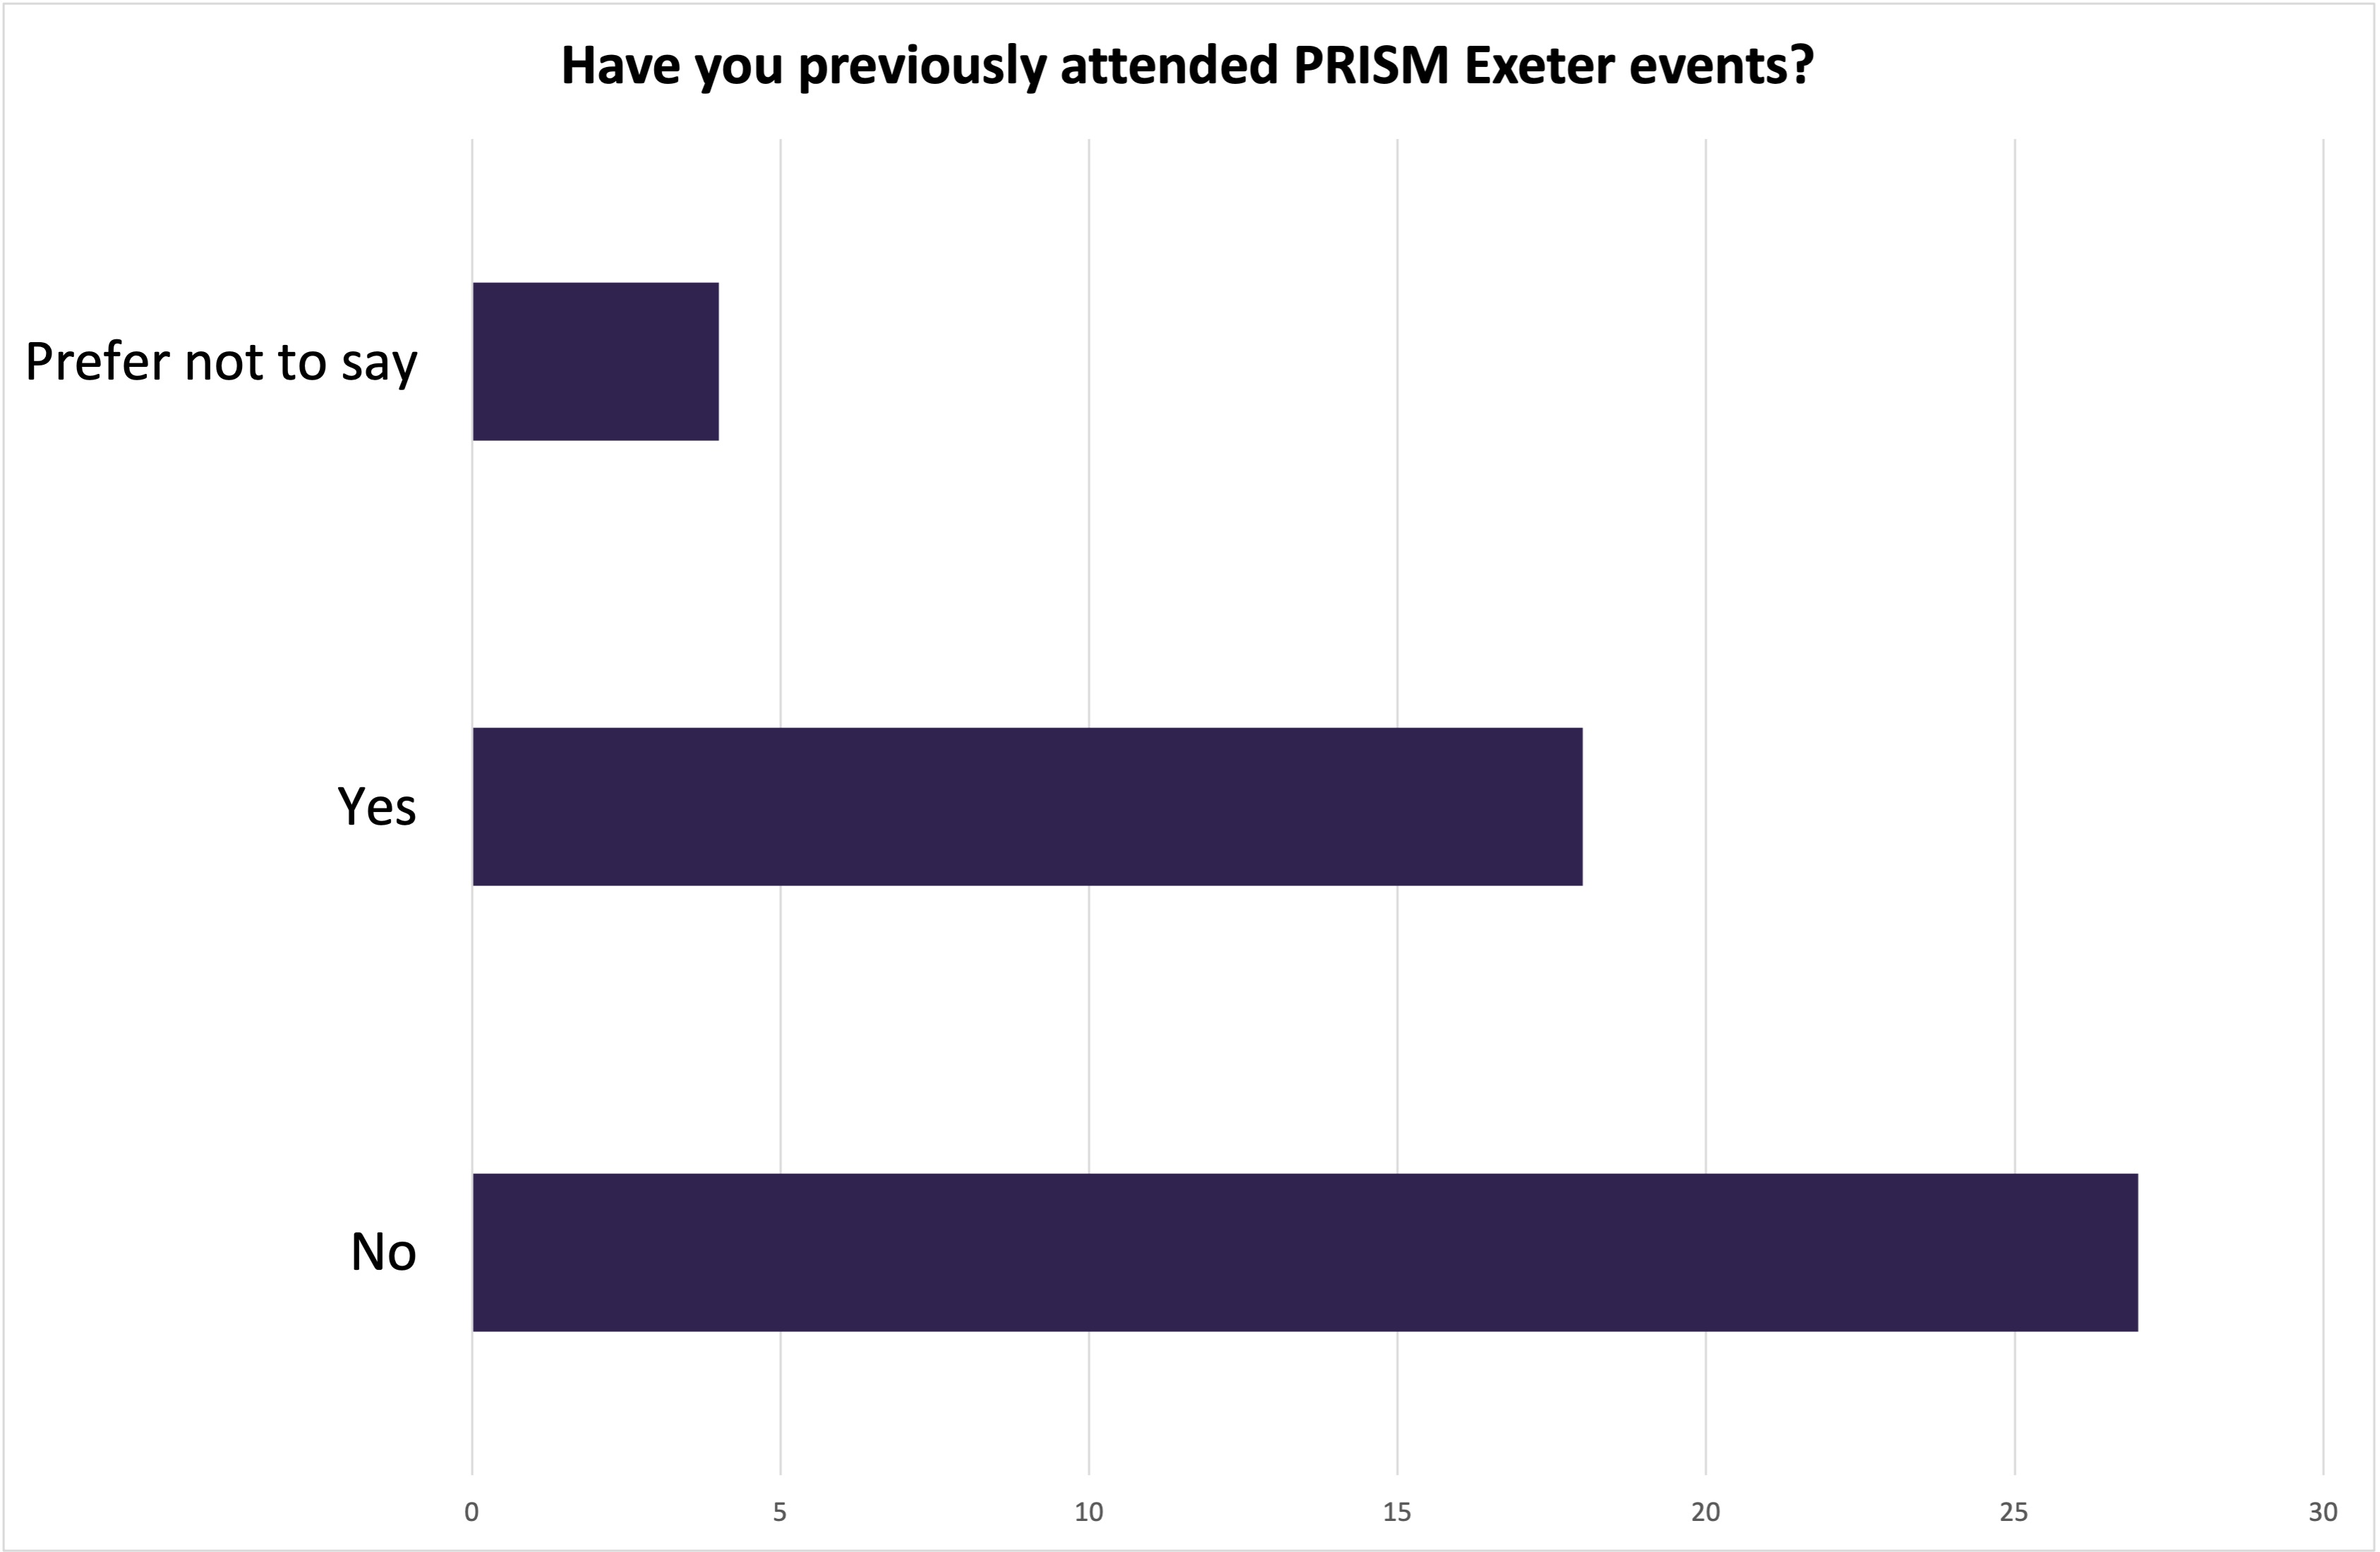 Bar chart of registrants' responses to the question 'Have you previously attended PRISM Exeter events?': 18 responded 'yes'; 27 responded 'no'; 4 preferred not to say.